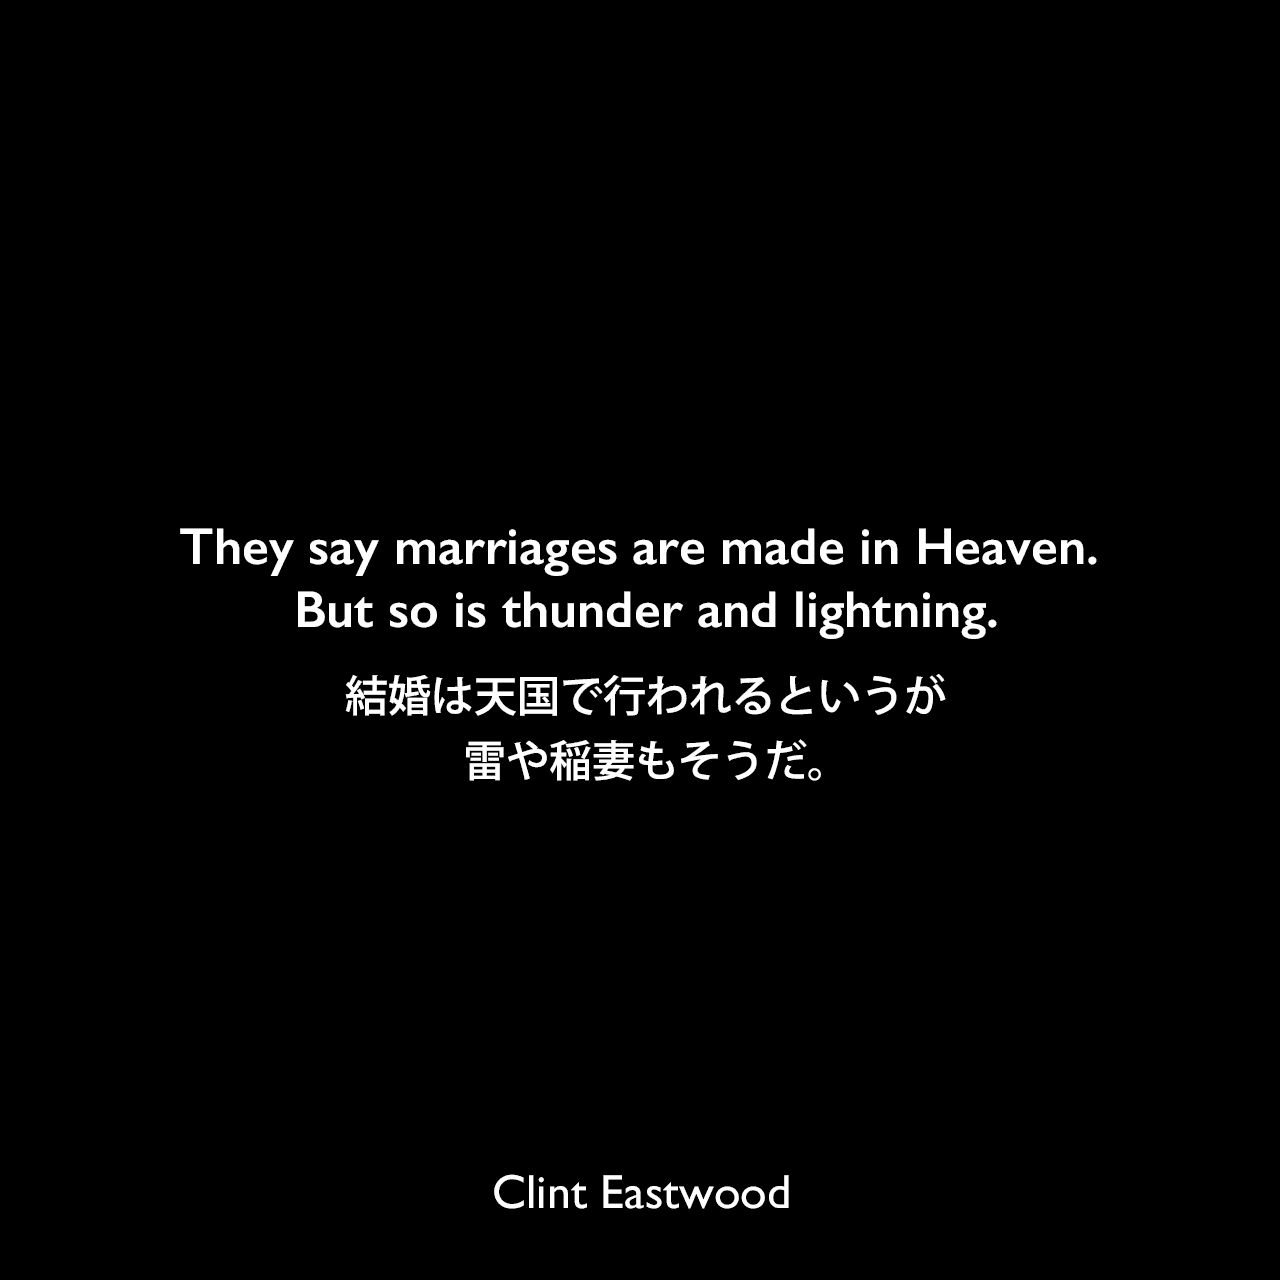 They say marriages are made in Heaven. But so is thunder and lightning.結婚は天国で行われるというが、雷や稲妻もそうだ。